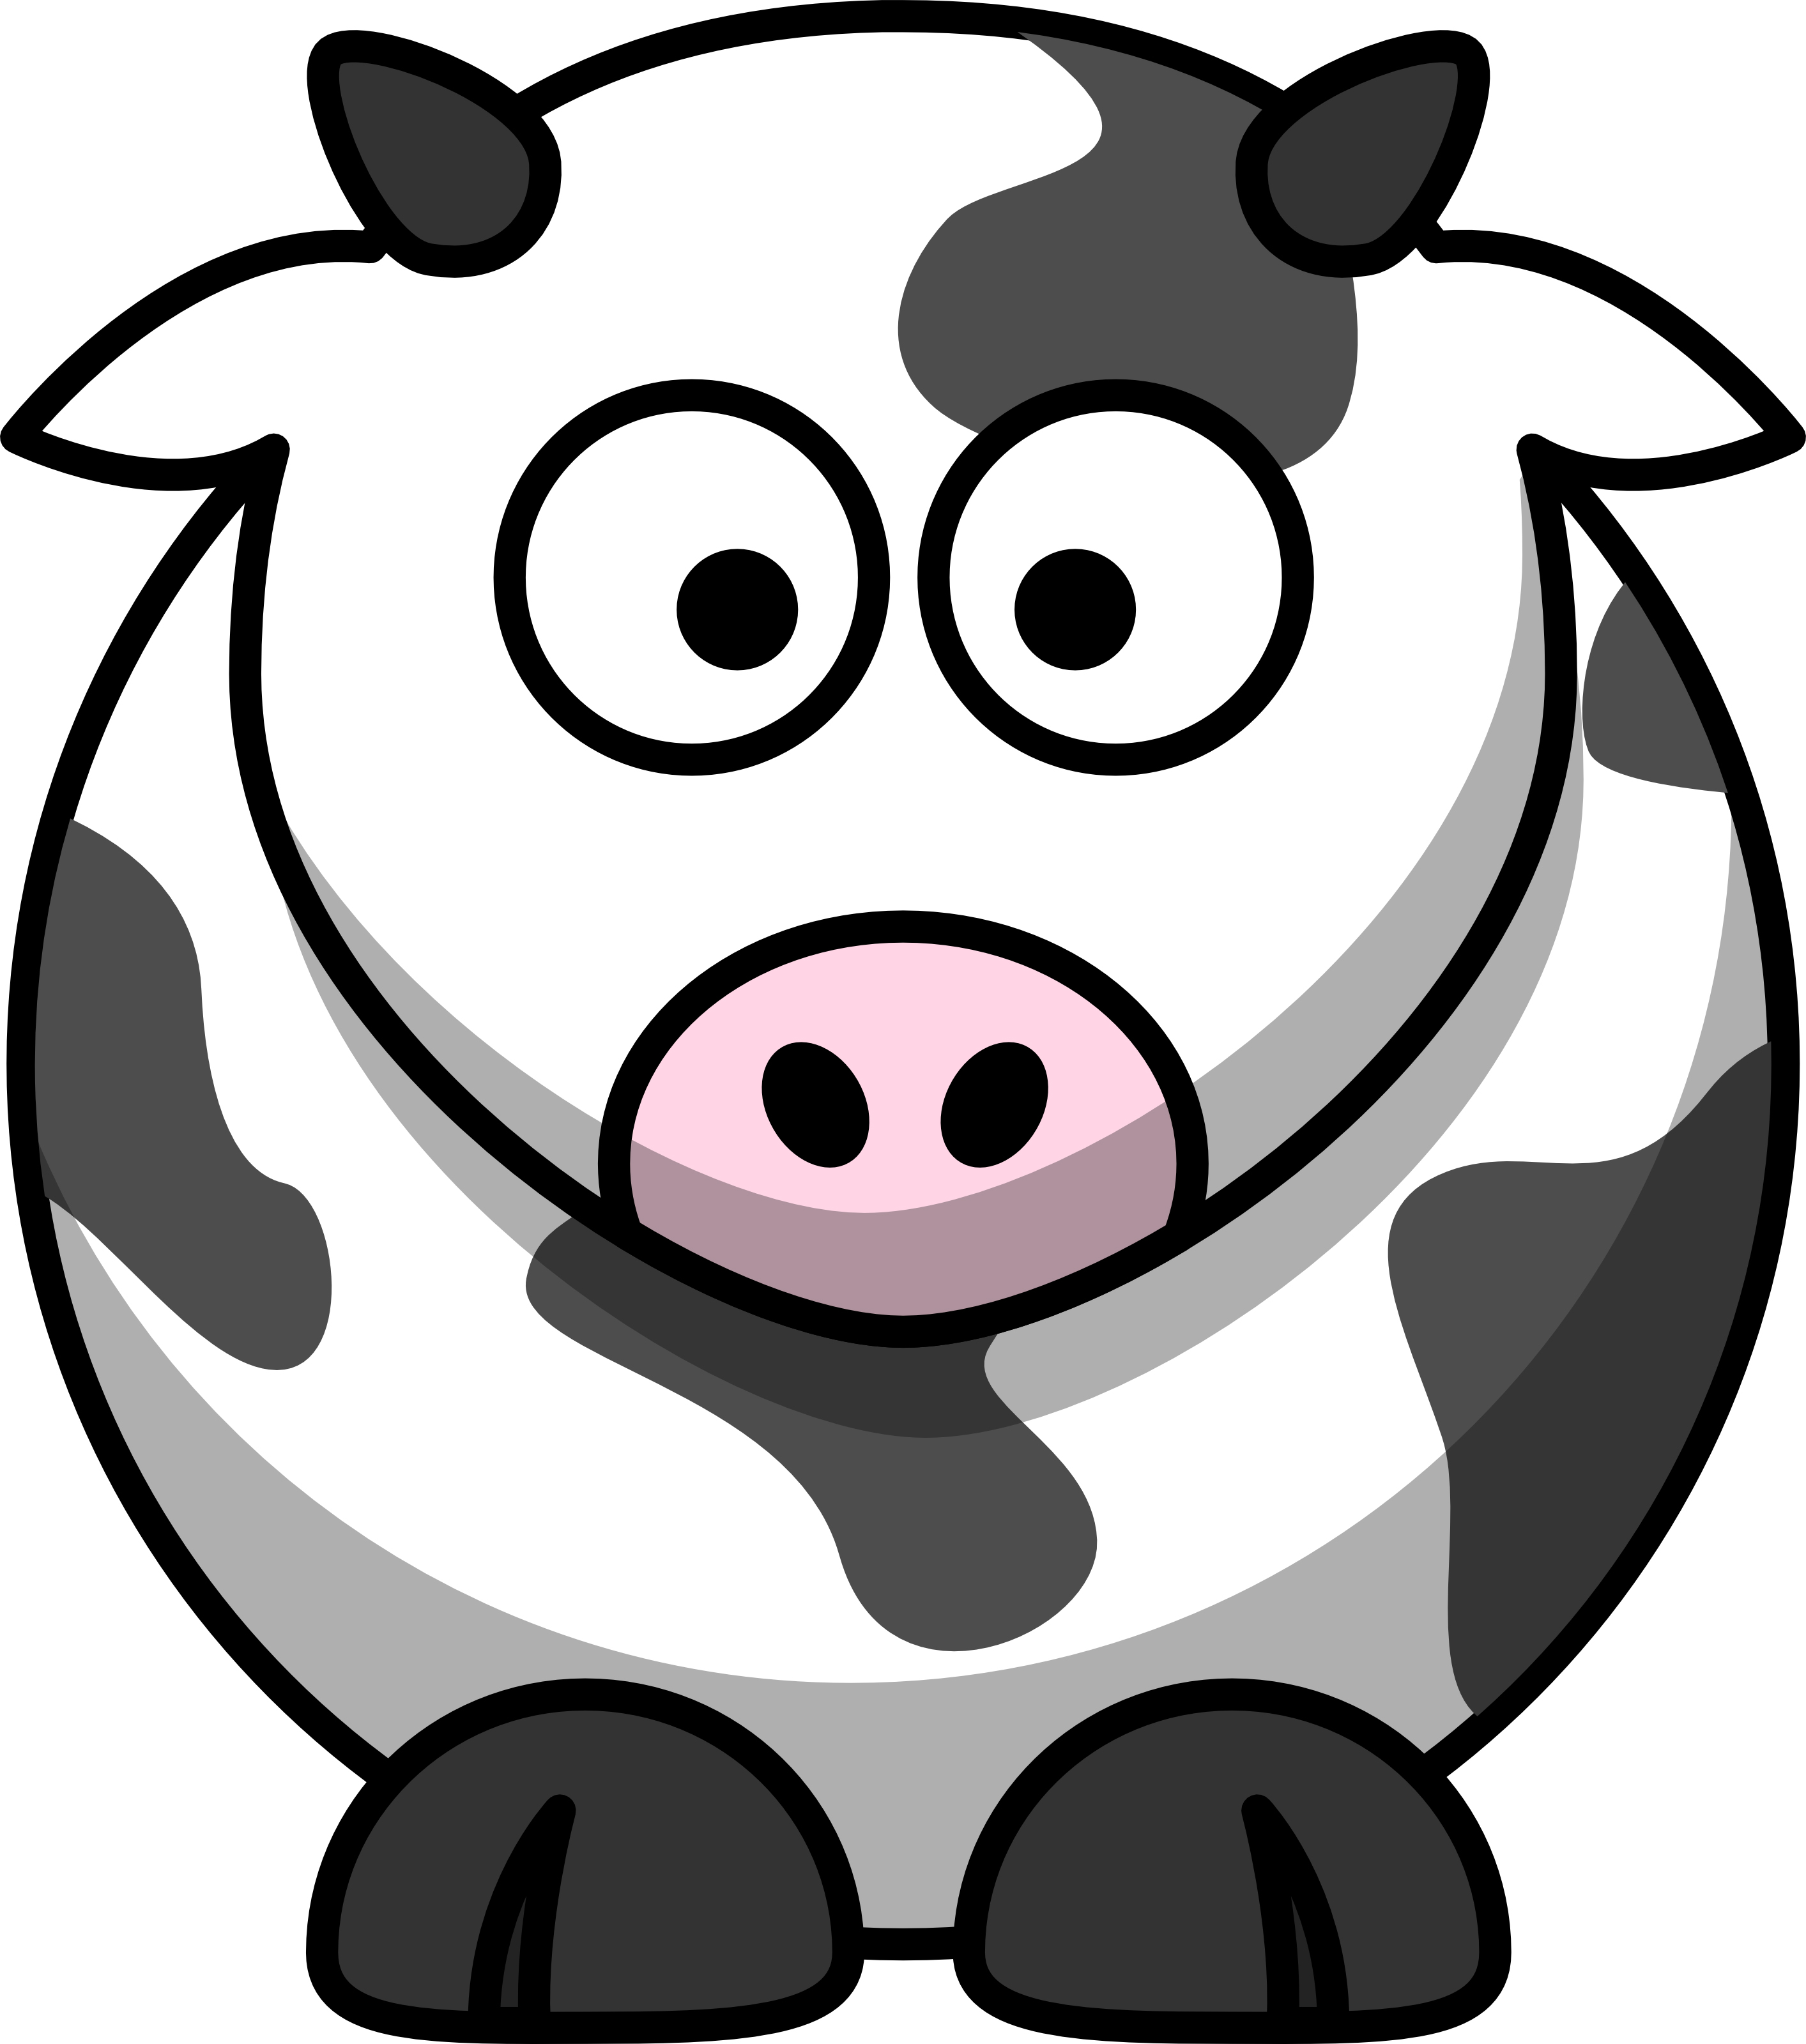 Image - 49-Free-Cartoon-Cow-Clip-Art - Wikibillthecow Wiki